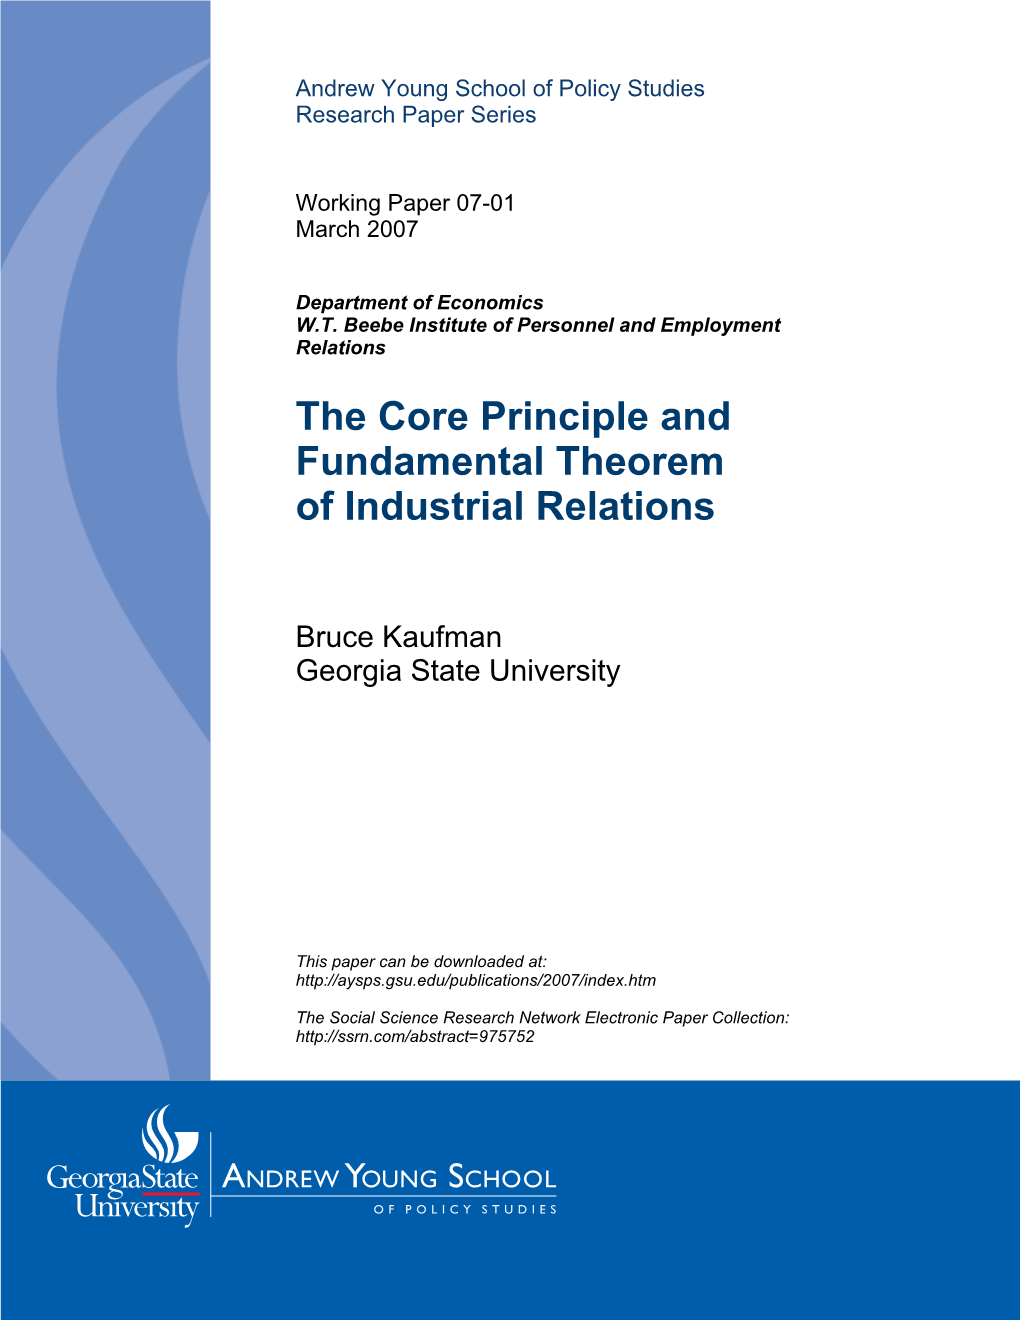 Core Principle and Fundamental Theorem of Industrial Relations